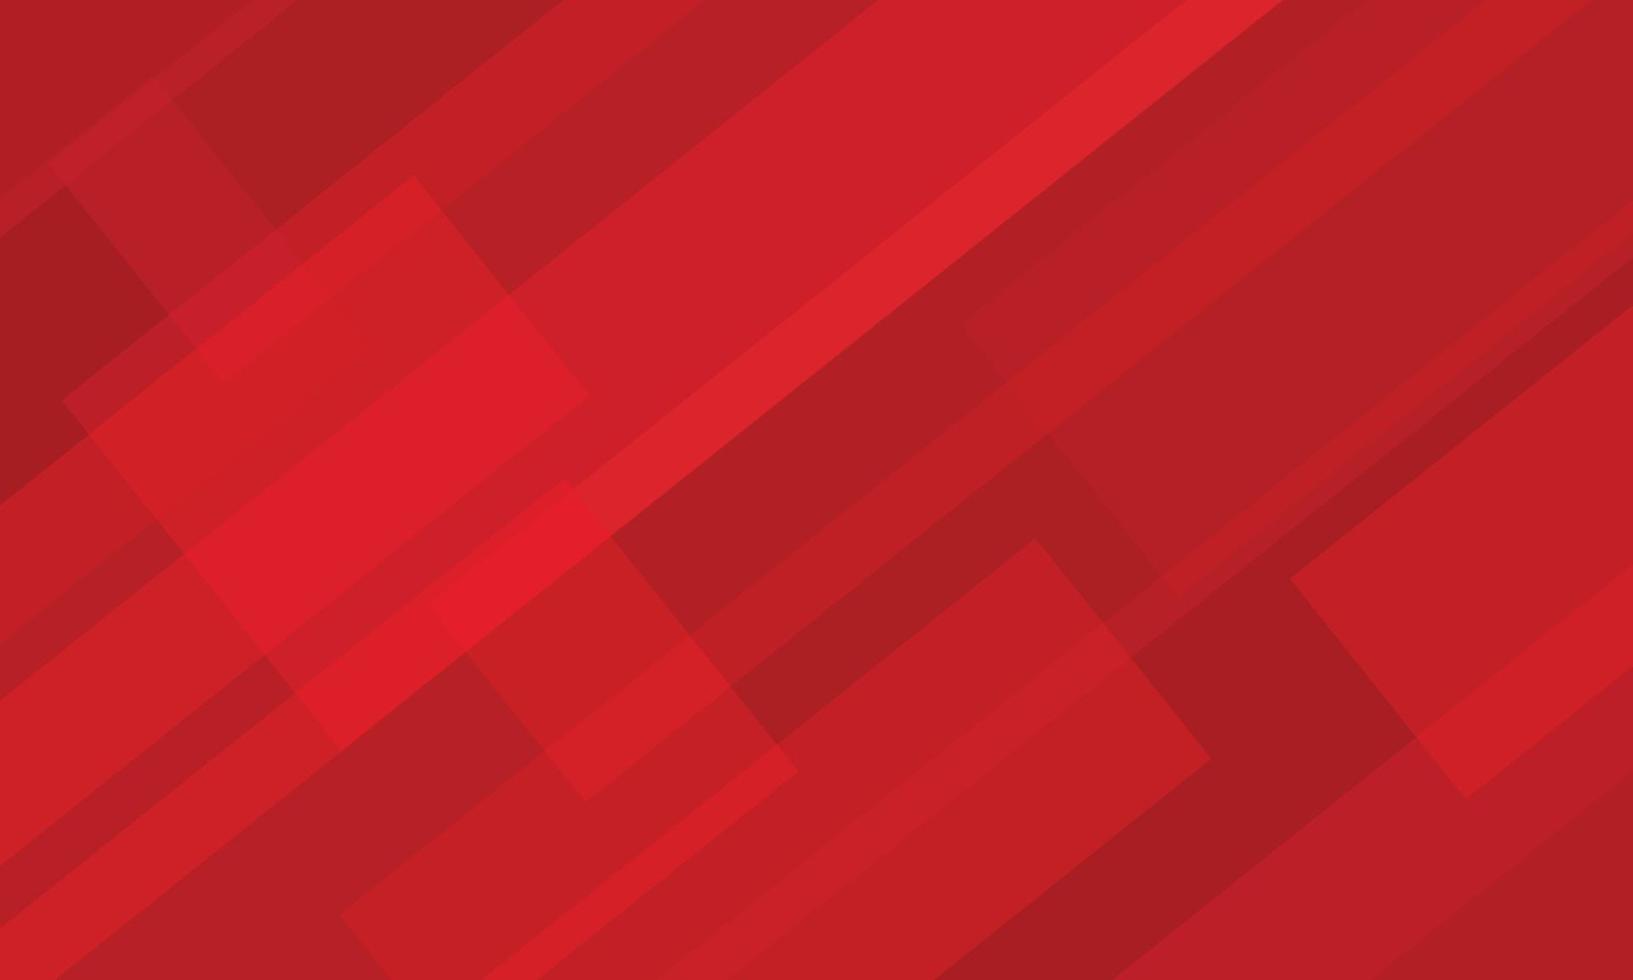 Red  background with abstract geometric shape overlay layer. vector